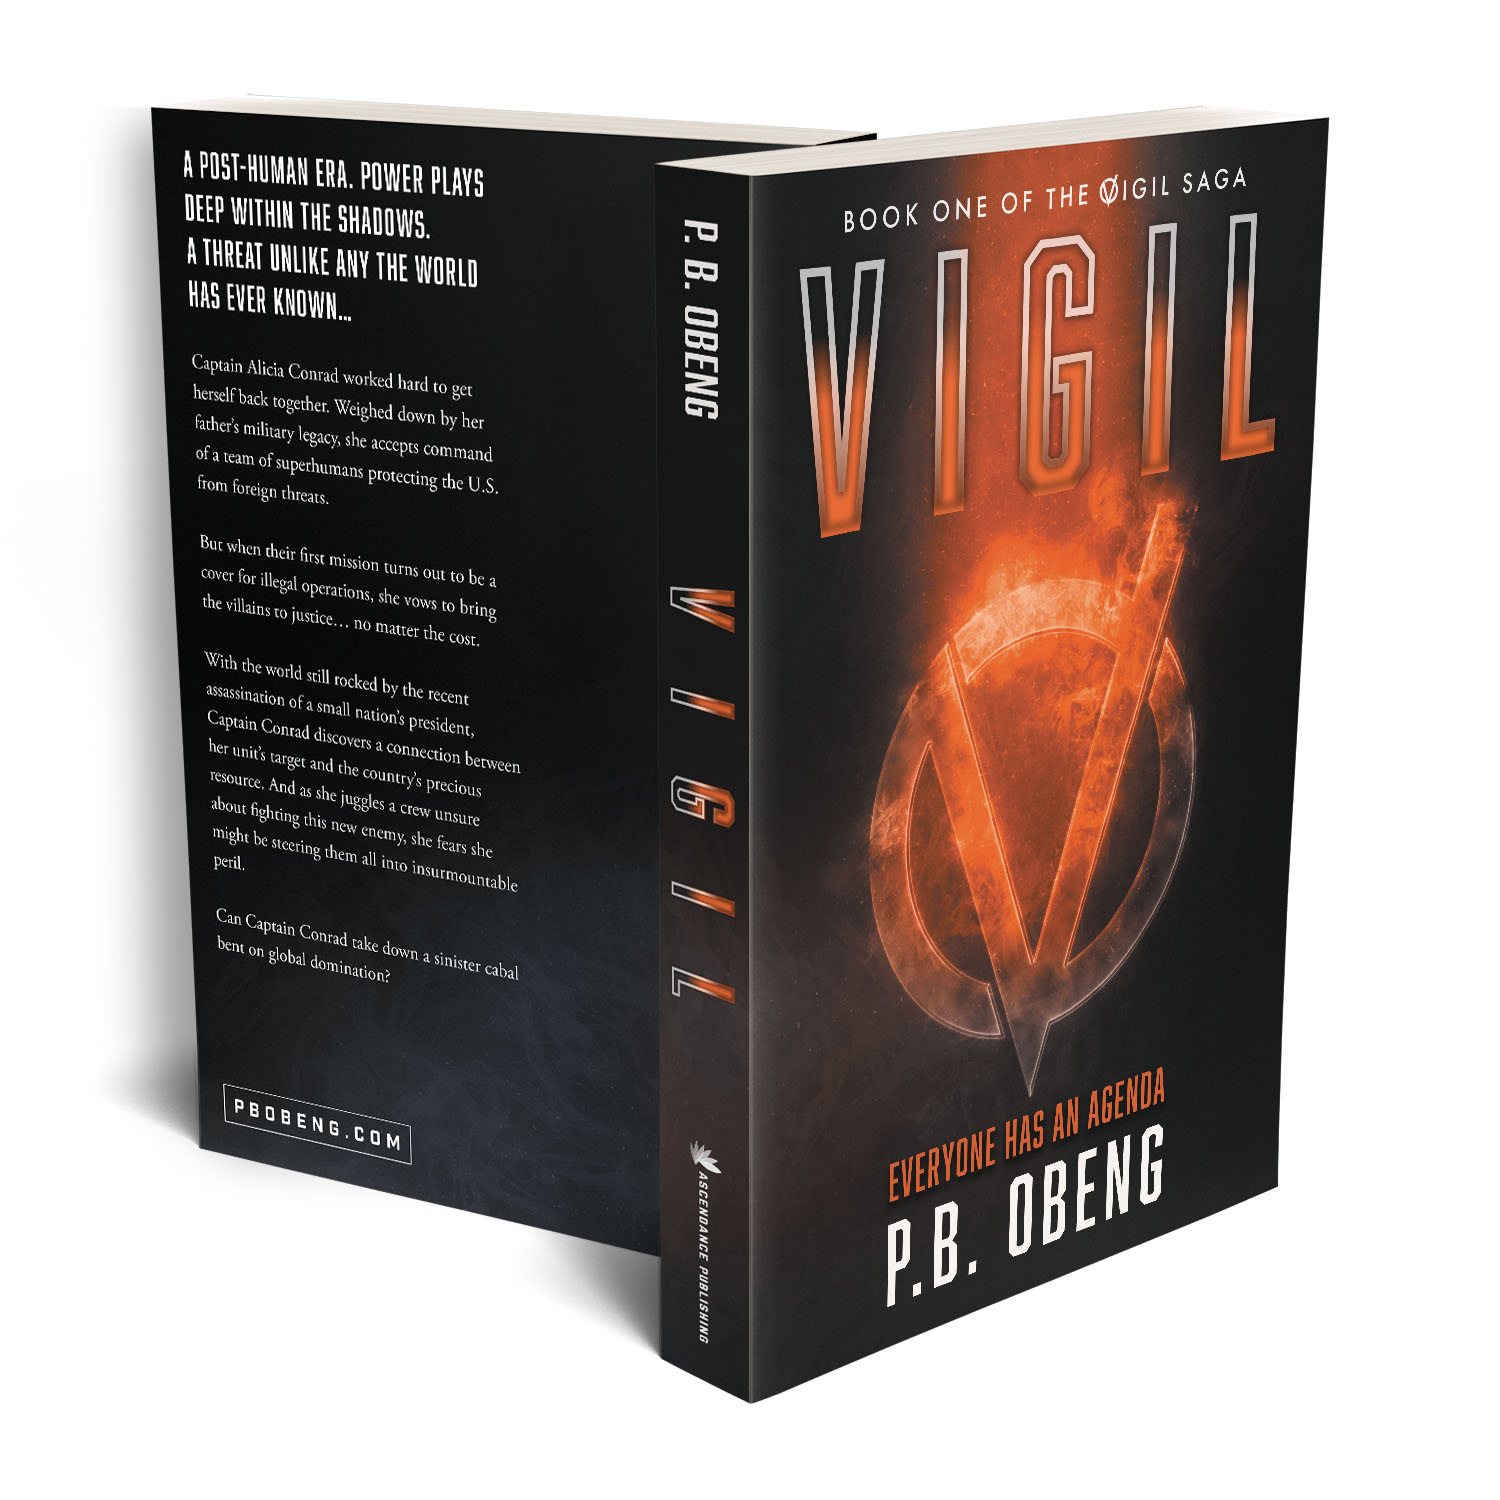 The 'Vigil' Saga is super-powered superhero scifi adventure series by PB Obeng. The book cover and interiors were designed by Mark Thomas of coverness.com. To find out more about my book design services, please visit www.coverness.com